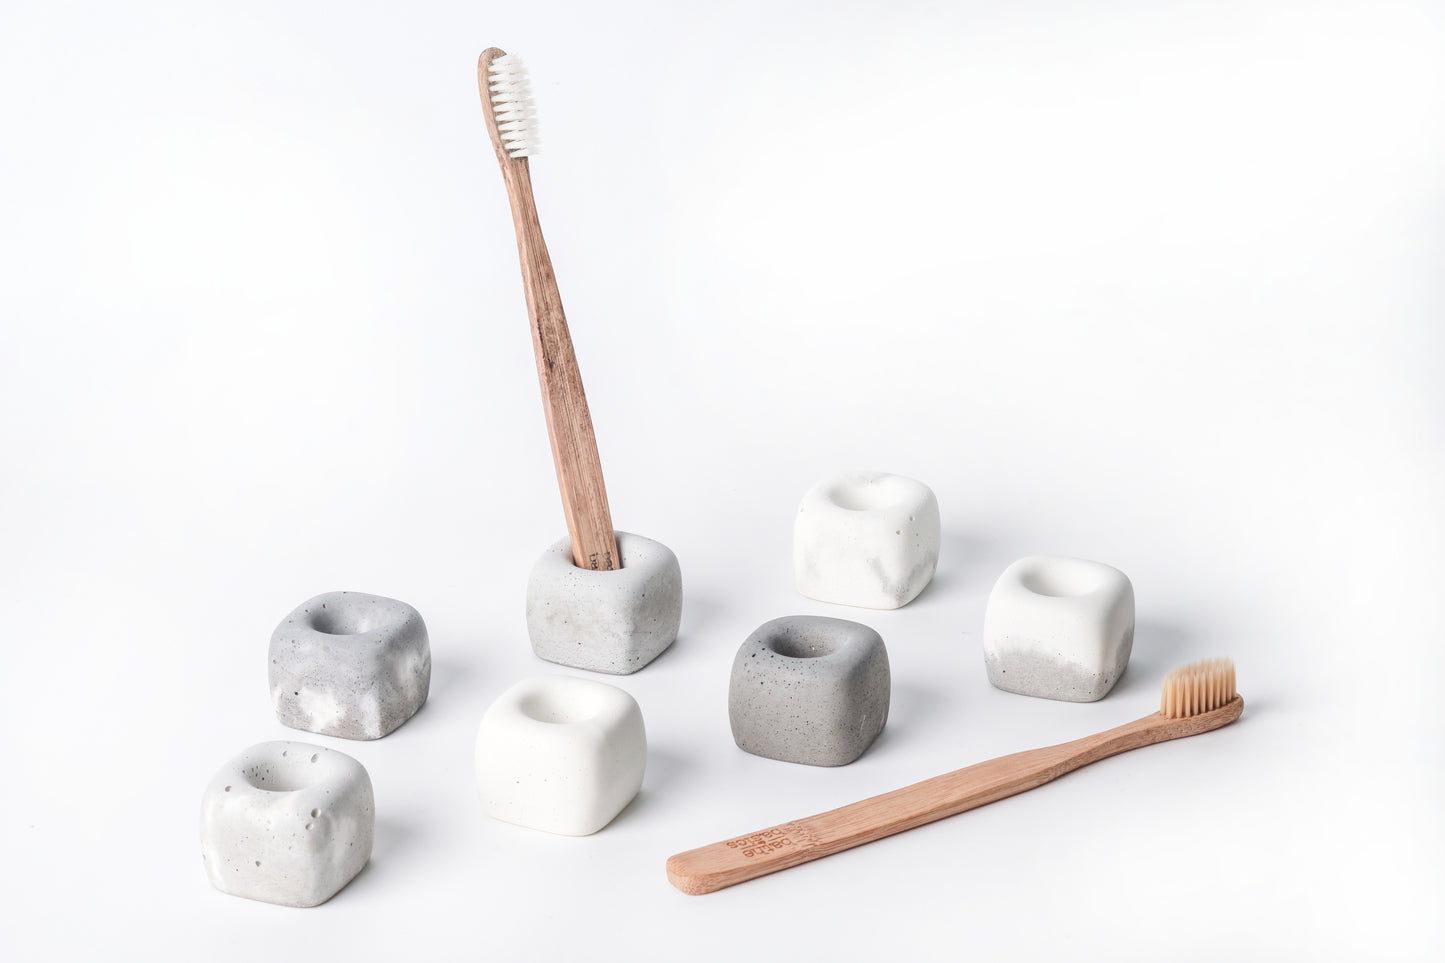 Concrete toothbrush holder - "marble grey"